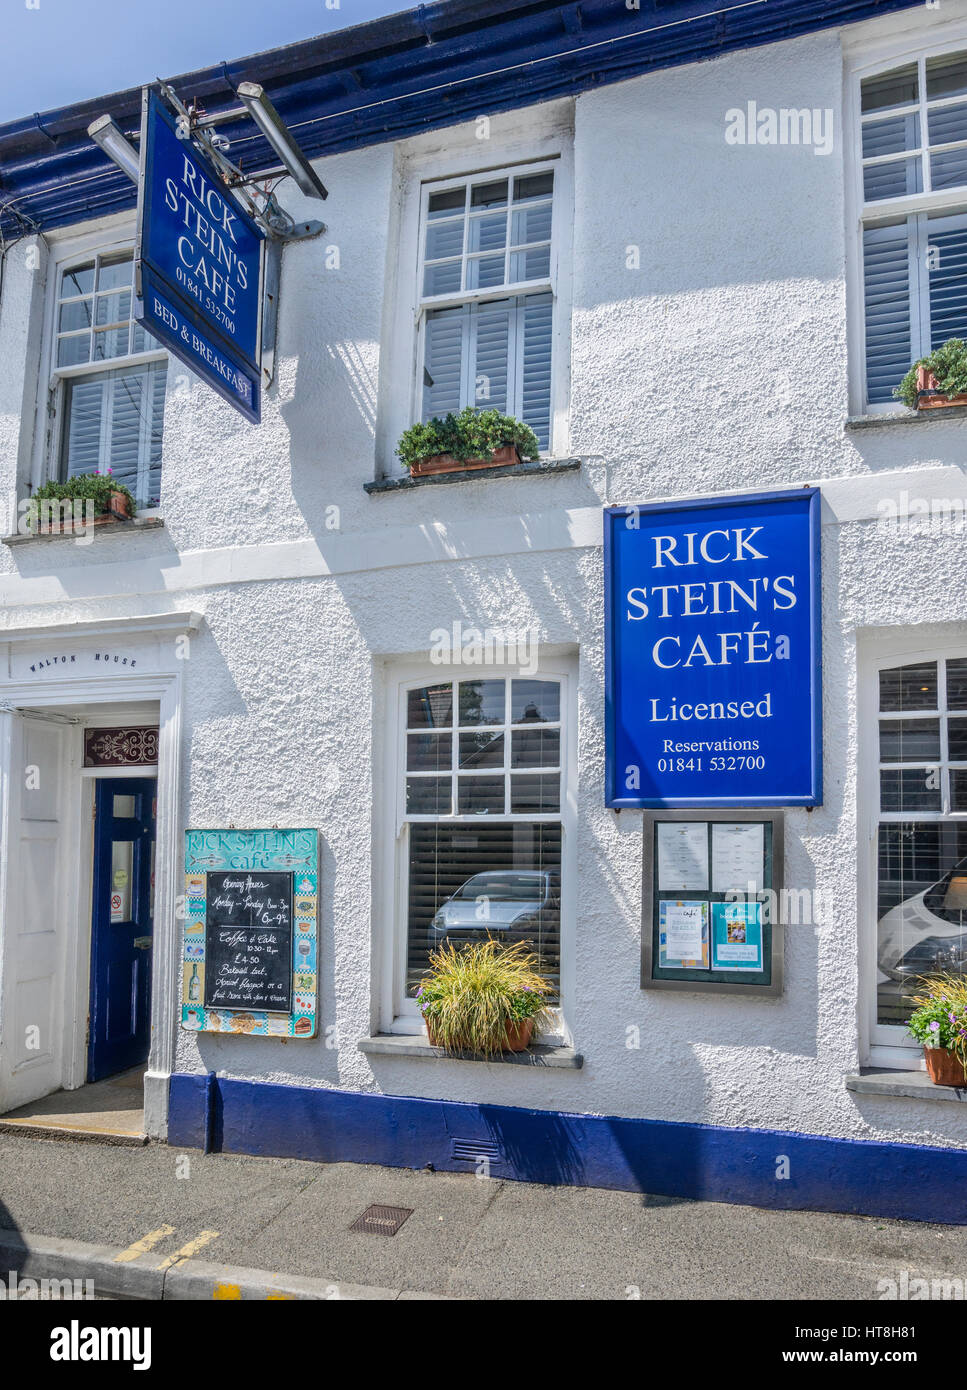 United Kingdom, South West England, Cornwall, Padstow, Rick Stein's Cafe Stock Photo